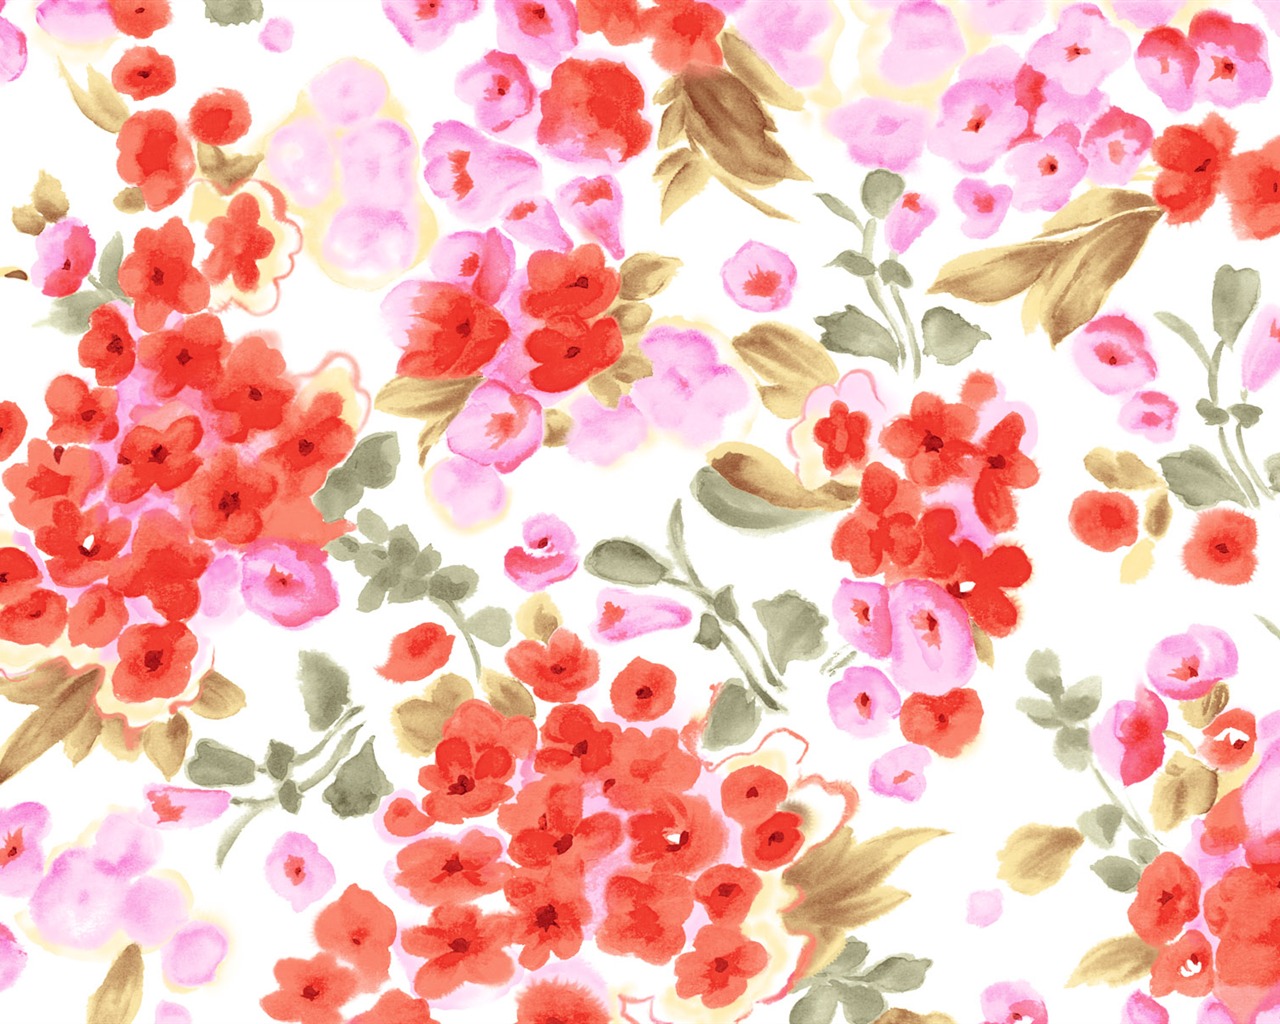 Synthetic Flower Wallpapers (2) #6 - 1280x1024